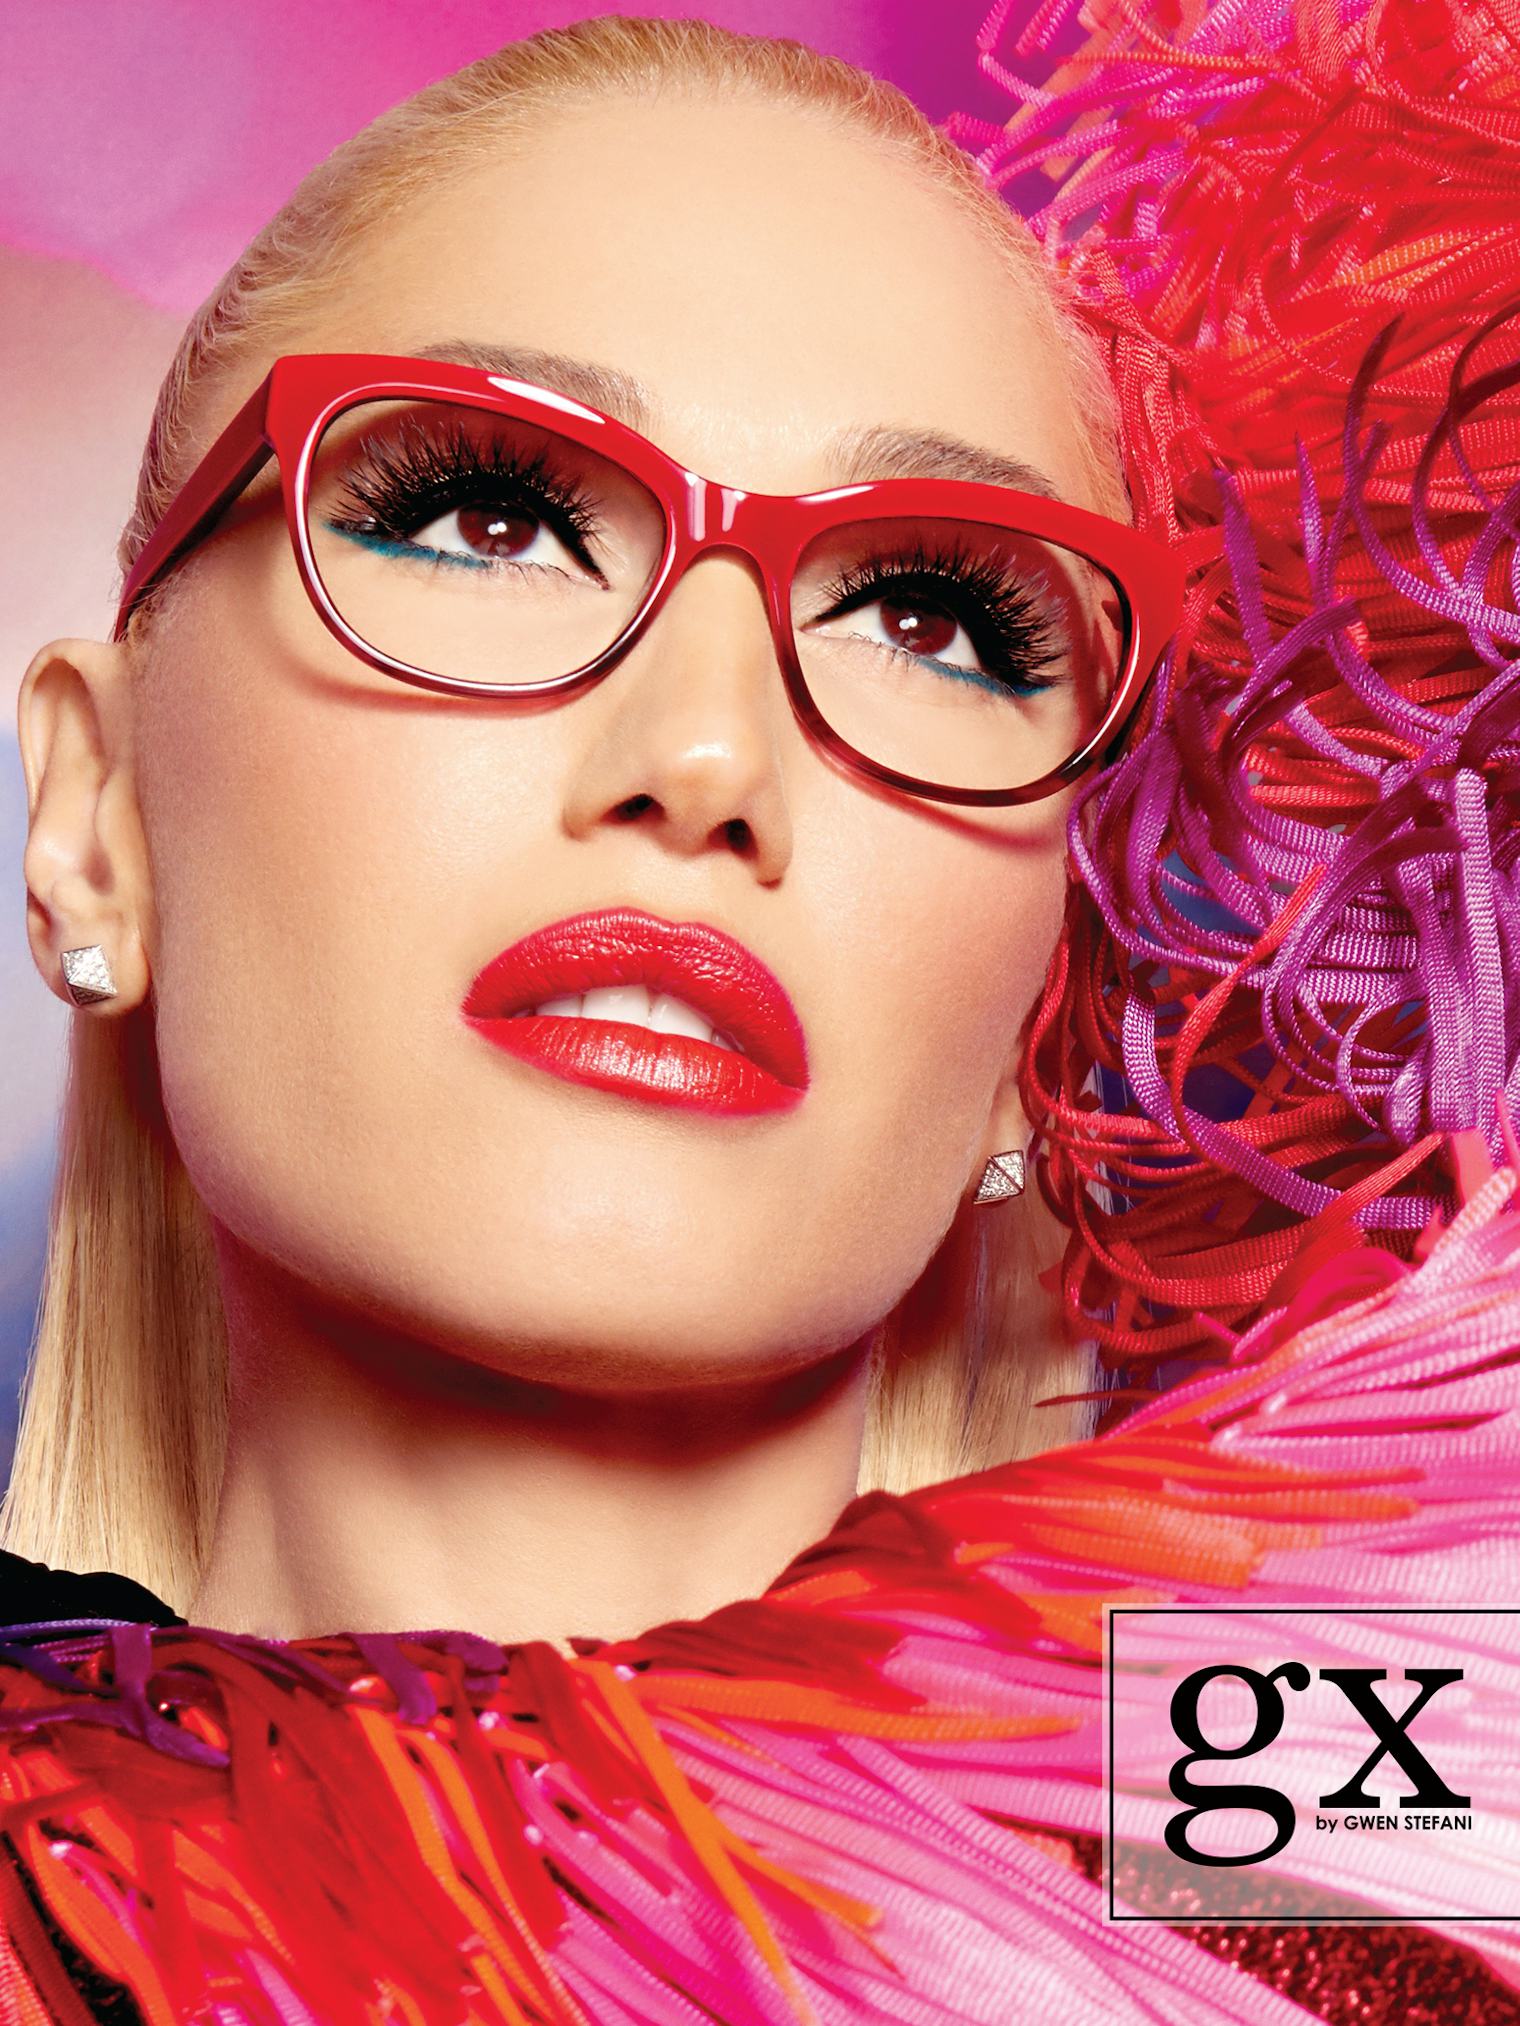 Gwen Stefanis Eyewear Collection Is Inspired By The Glasses Shes Always Wanted To Wear